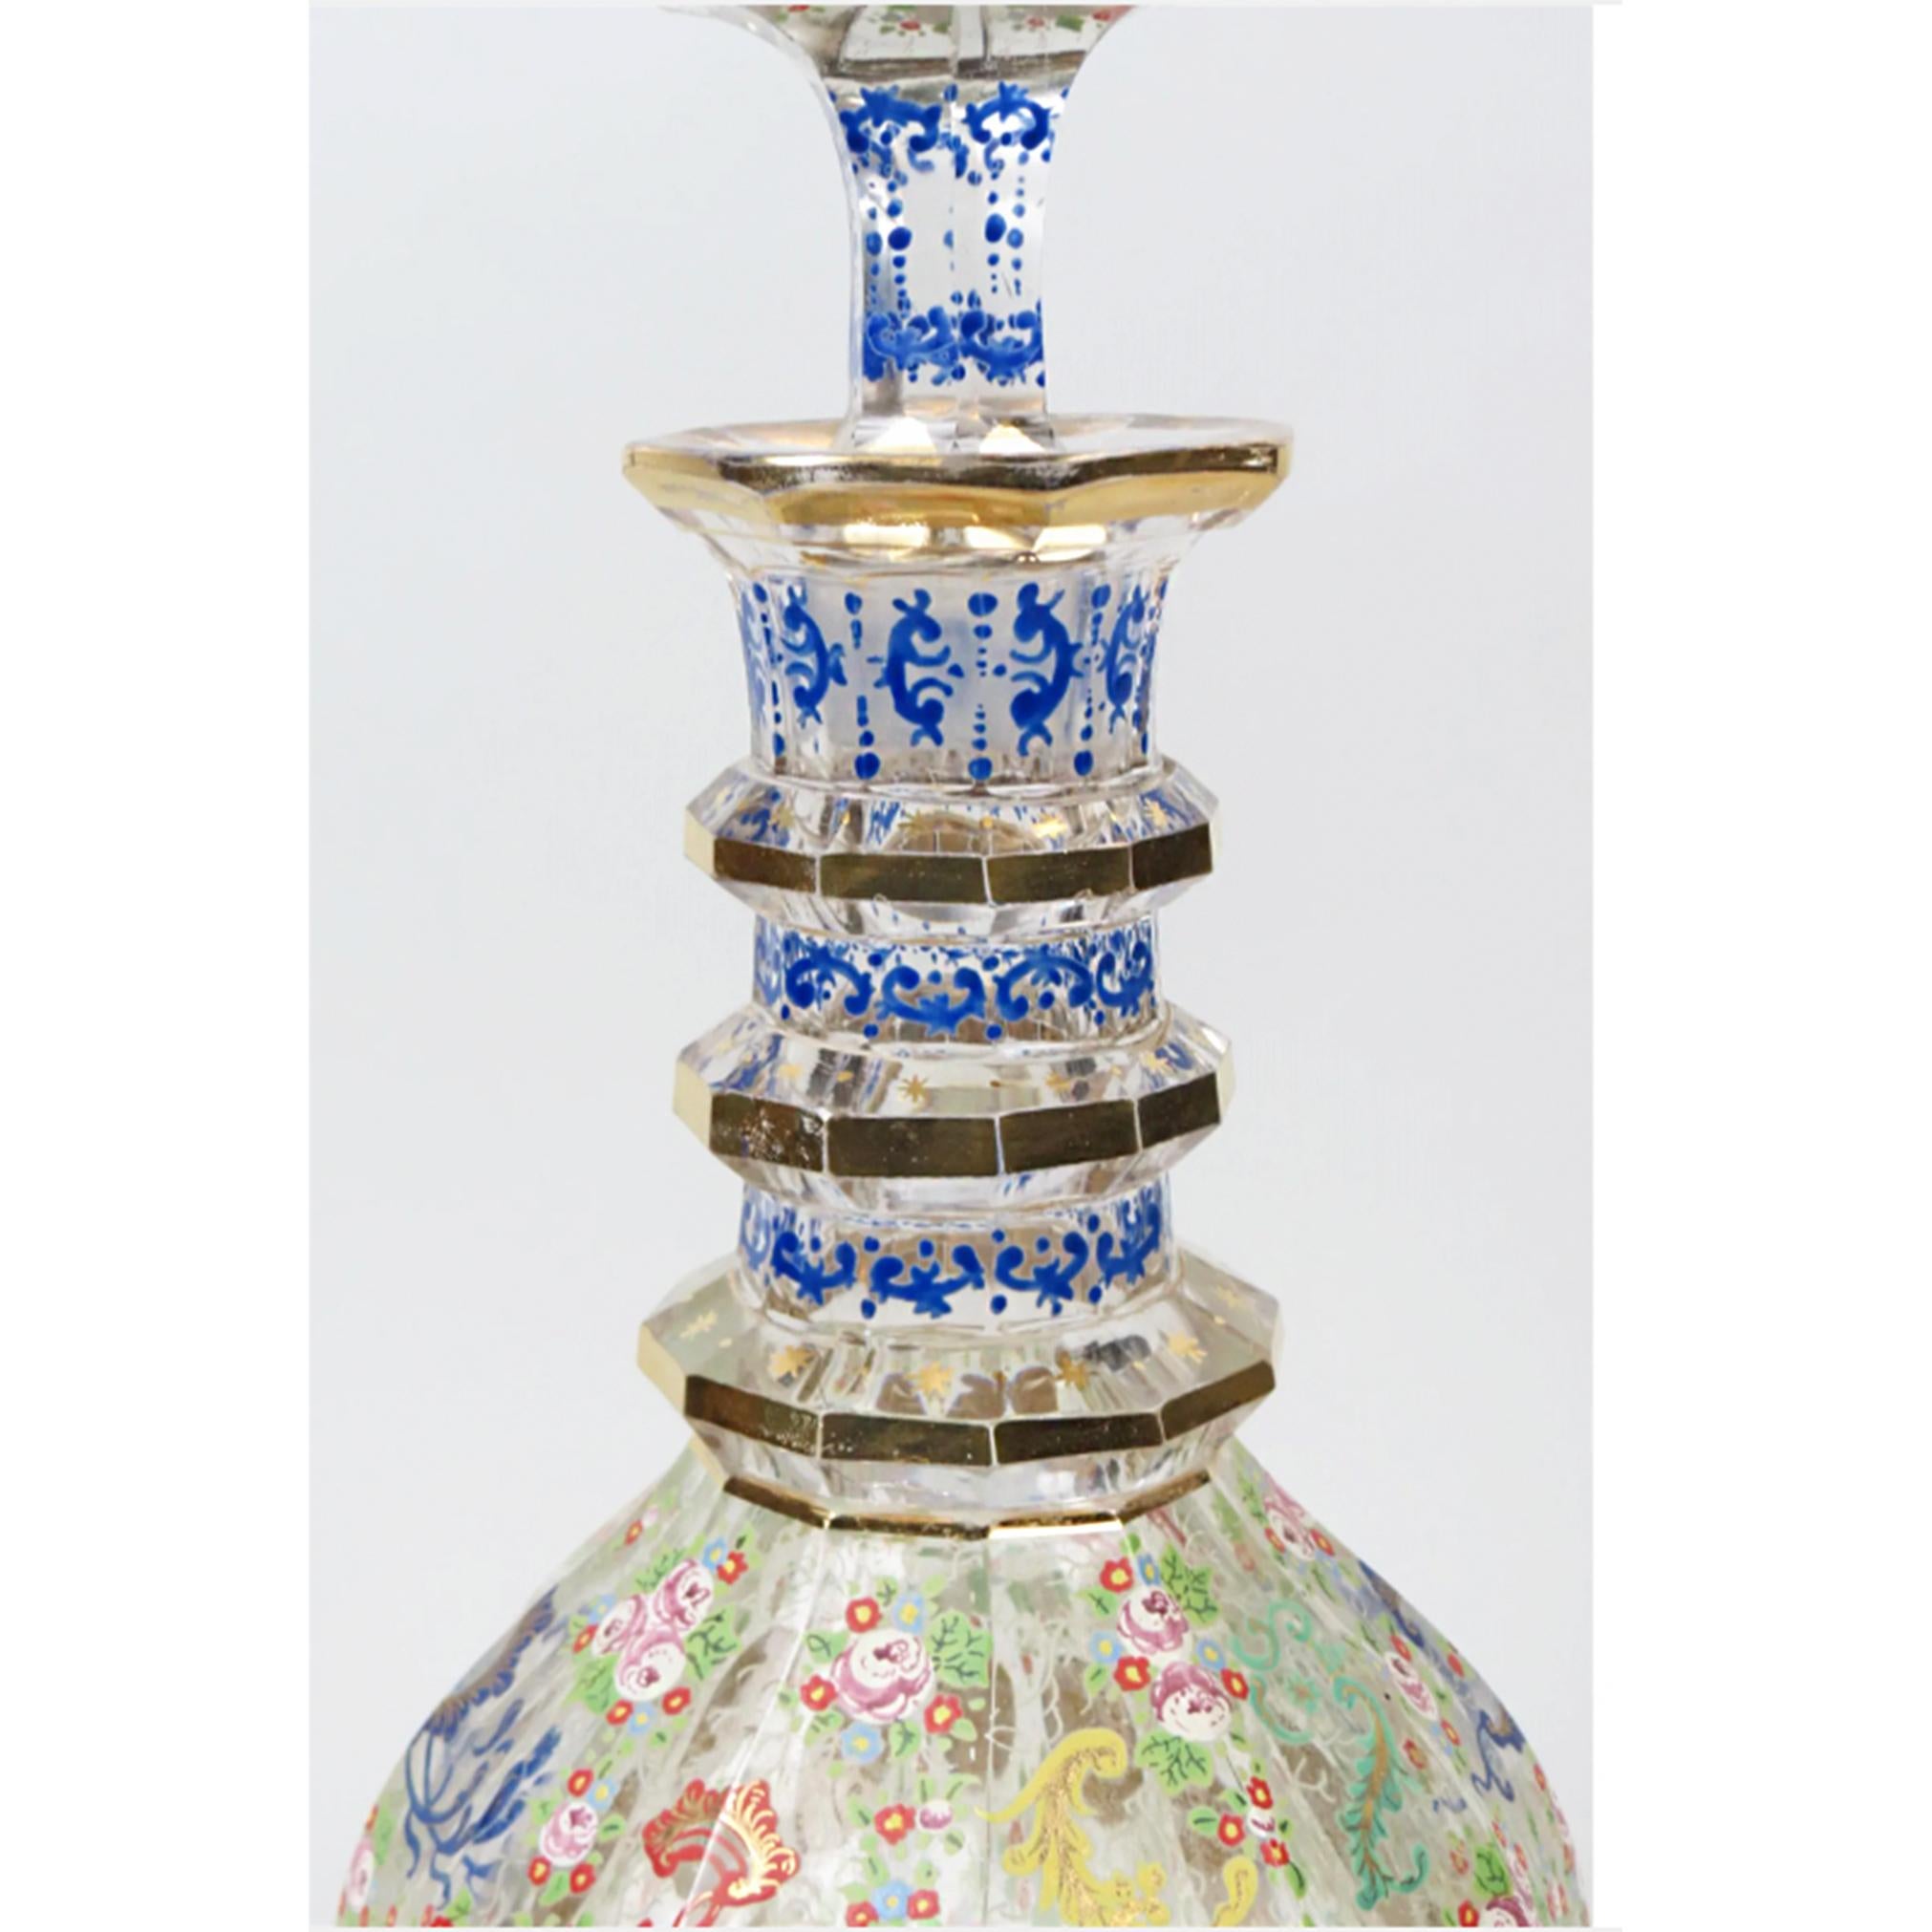 Large Bohemian Enameled Glass Decanter, panel cut with central golden medallions, royal blue and gold leaf multi ring neck. Wrapped in elaborate and decorative floral designs designs. 

Date:  19th century

Dimensions: 17 1/2